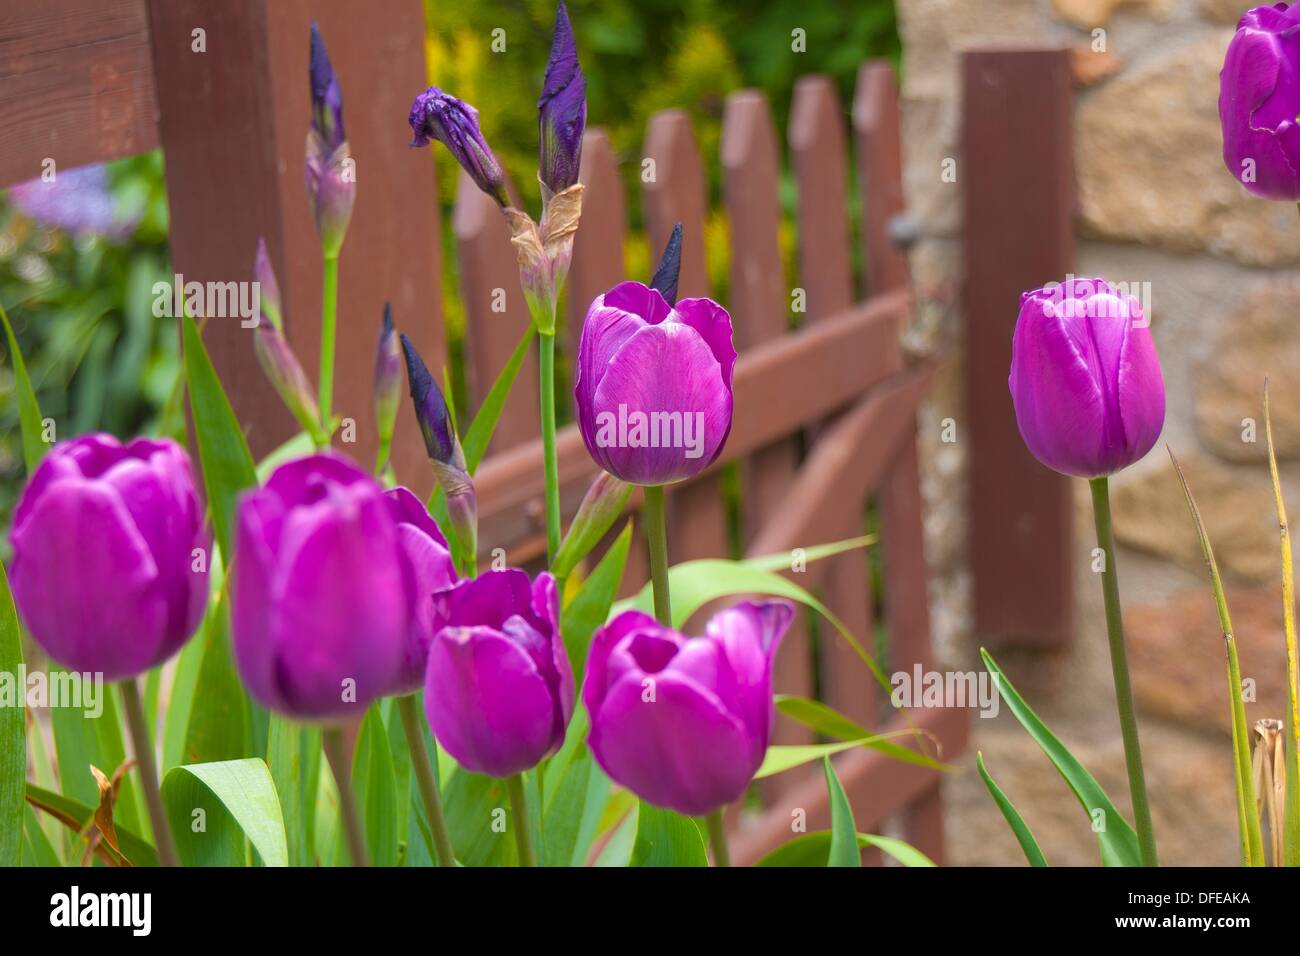 Lilas mauve hi-res stock photography and images - Alamy